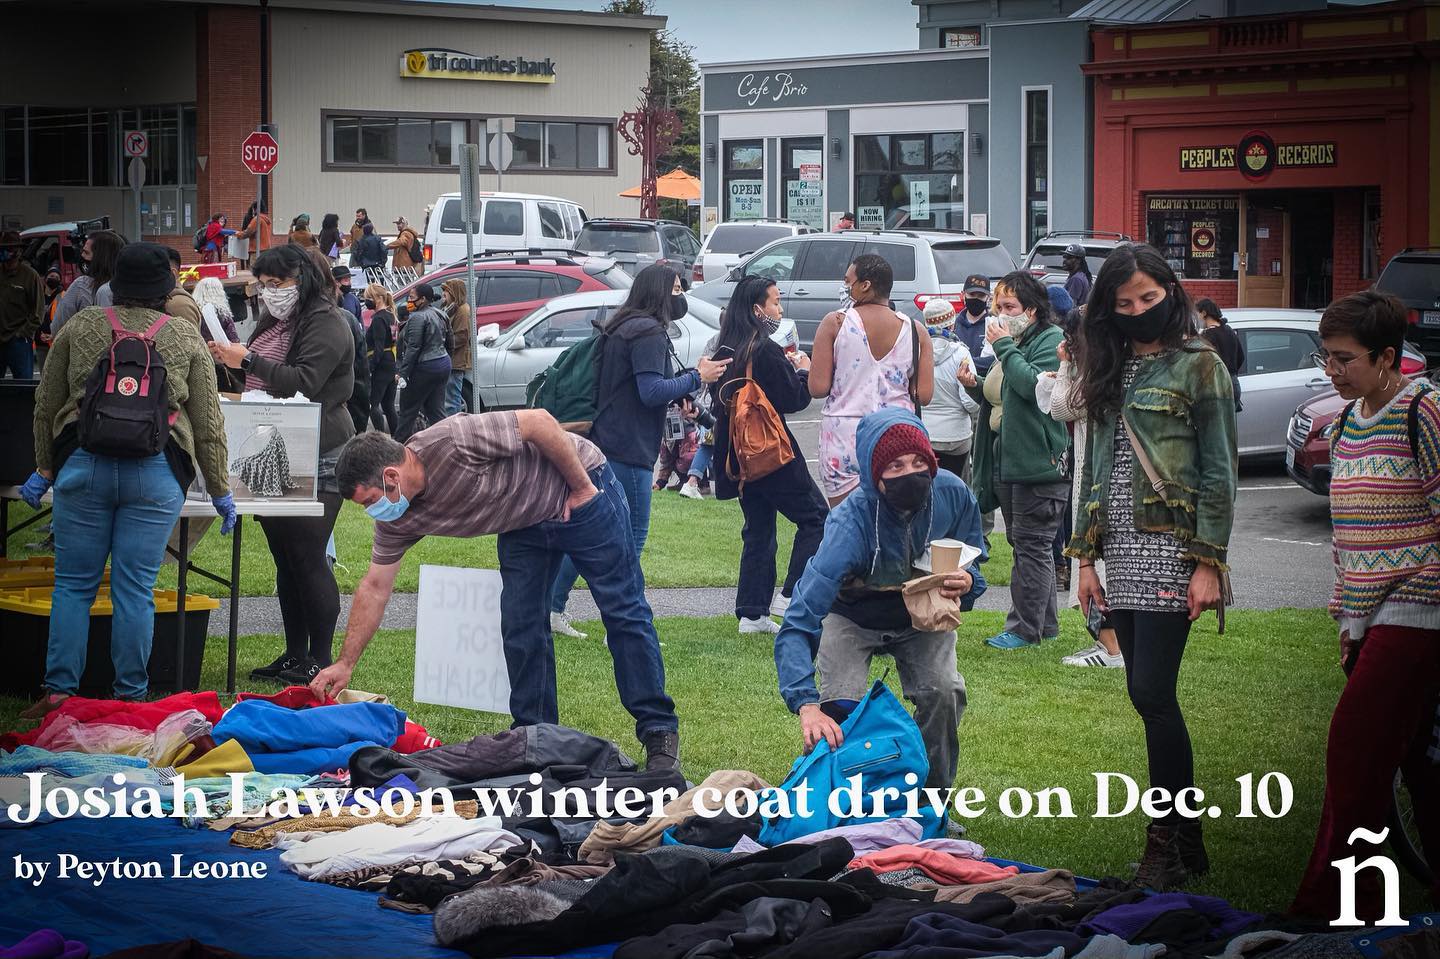 More than 5 years after the murder of her son, Charmaine Lawson is honoring his memory with the 5th annual coat drive. Dec. 10 from 3-5 p.m. at the Arcata Plaza coats and other supplies will be distributed to those in need.

by Peyton Leone
photo by Ricardo Lara Nava